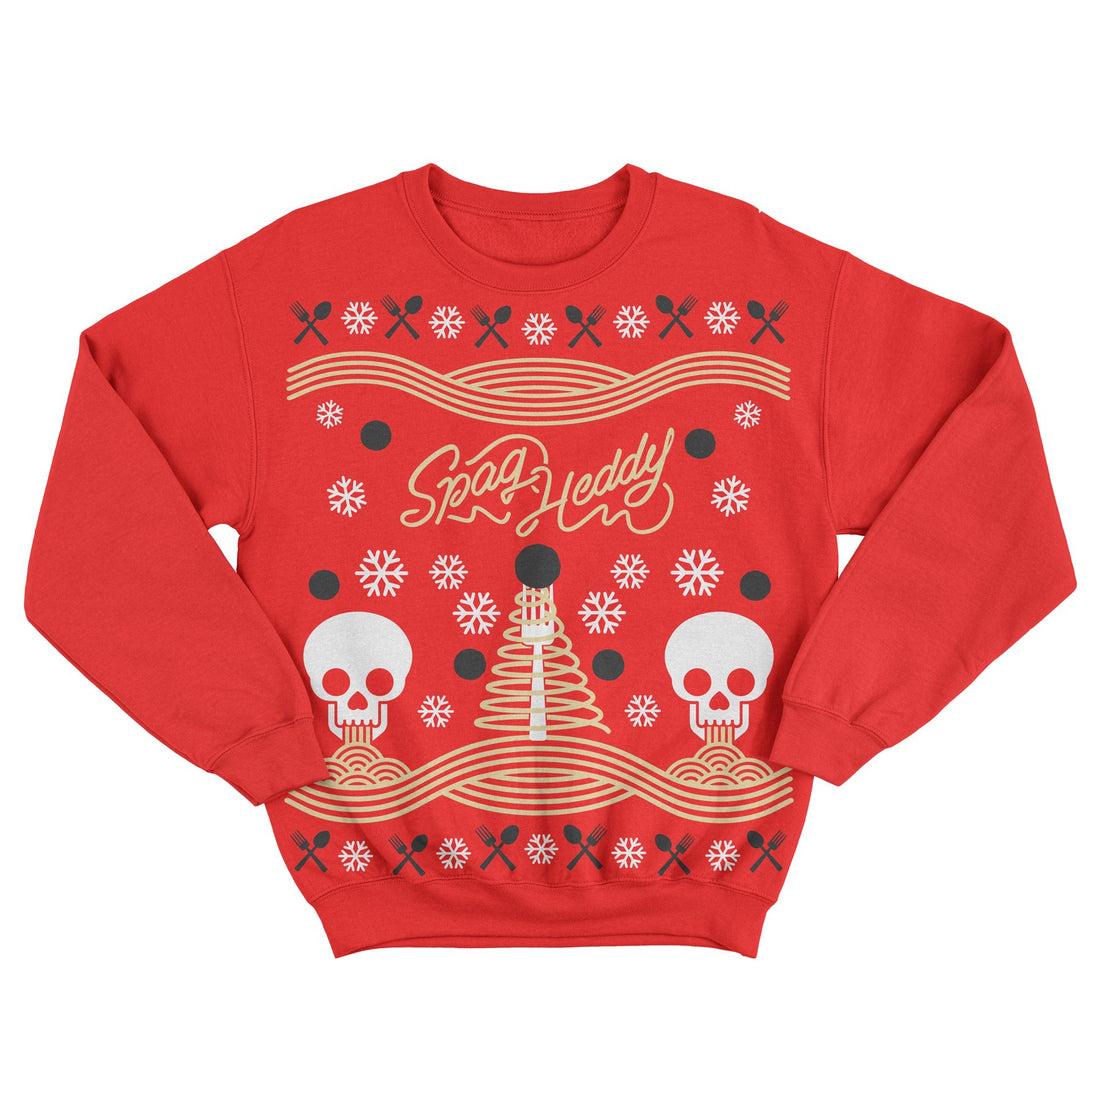 Spag Heddy - 2019 / 2020 Holiday Sweater